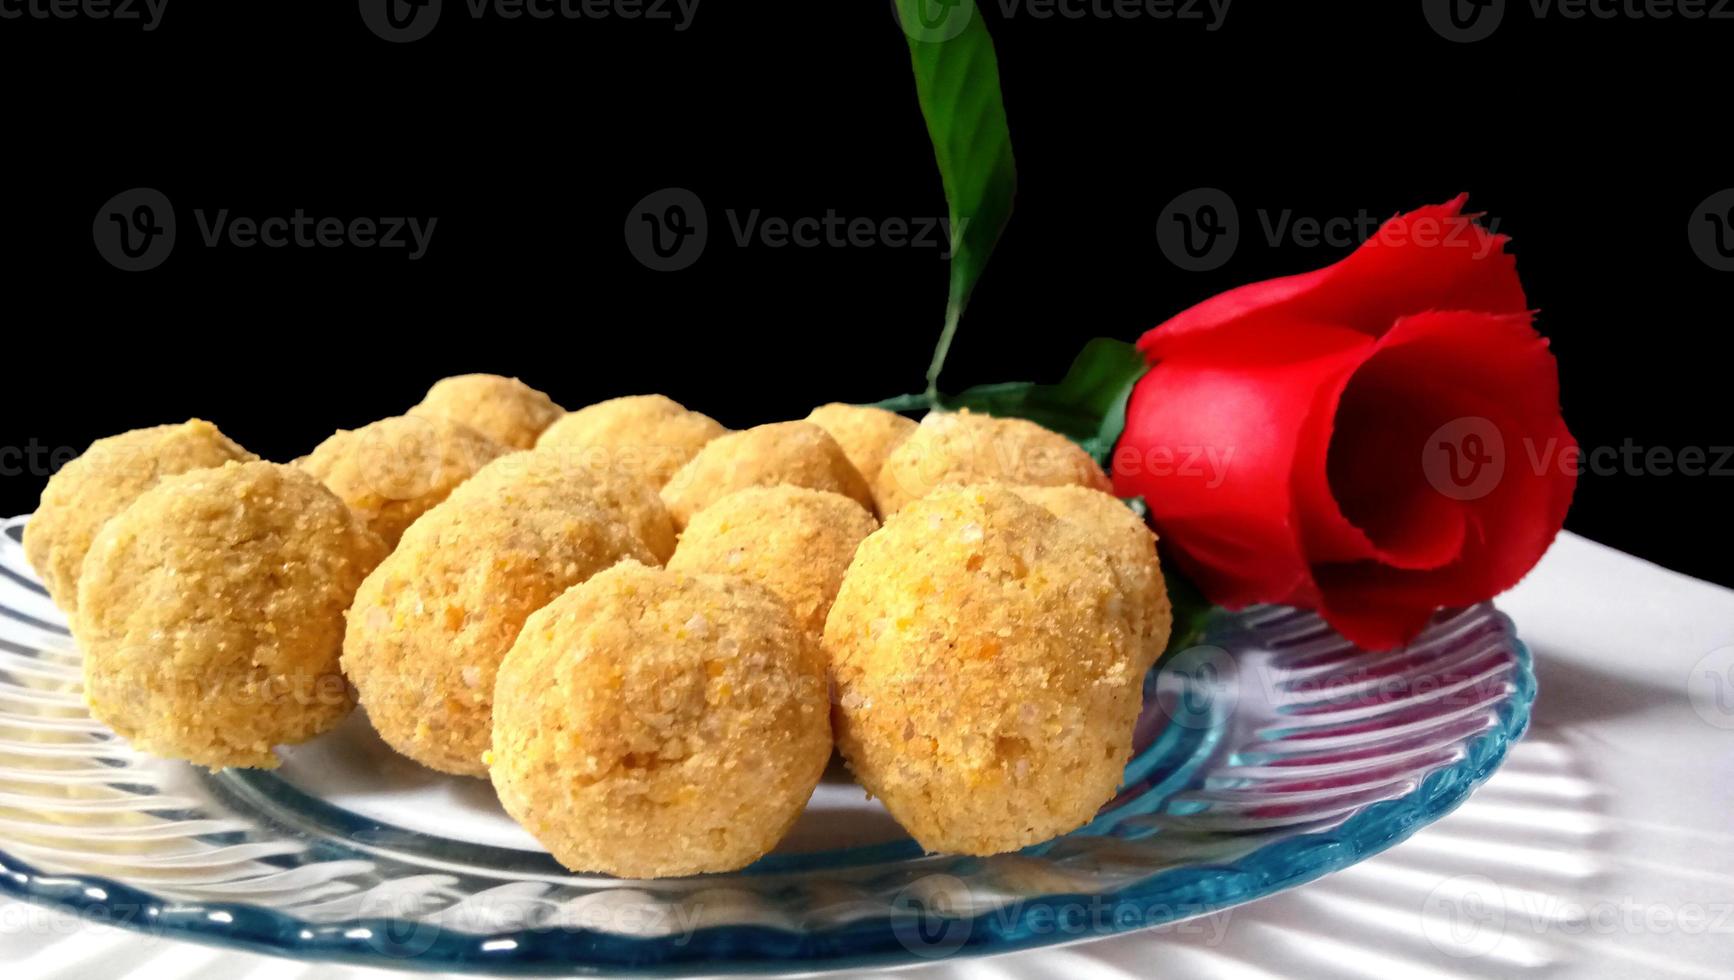 Mouth watering sweet - Besan laddoo made by roasted gram flour, ghee, dry fruits and sugar, served in a plate photo